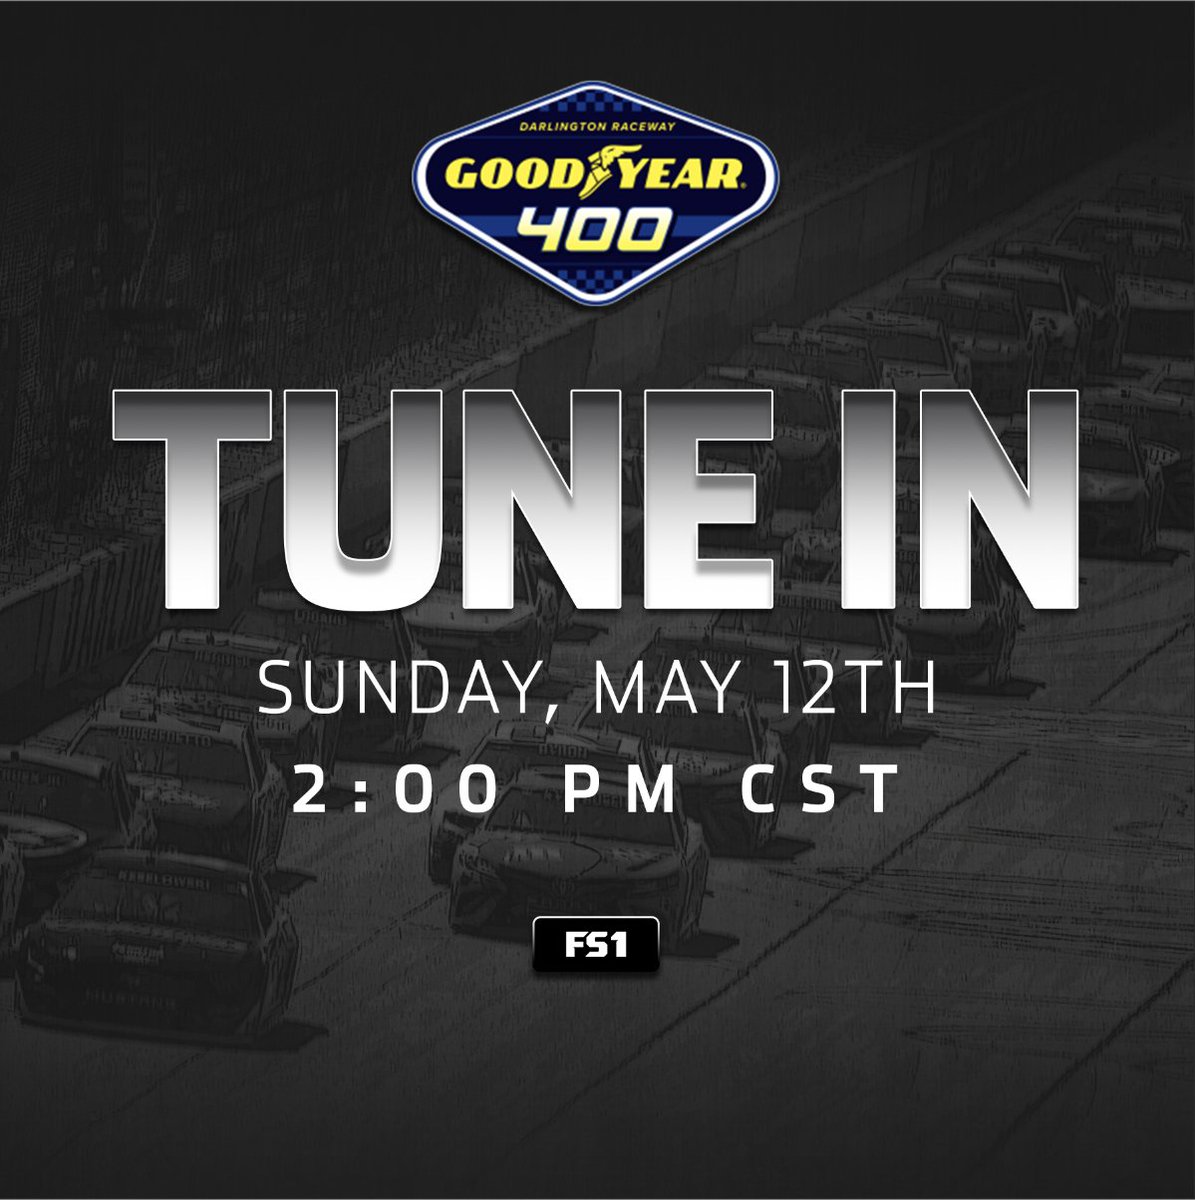 After last week's race, you don't want to miss this one!😮‍💨 IT'S RACE DAY🏁 Tune in at 2PM CST to @foxsports for the Good Year 400 at @tootoughtotame! 🏎️💨